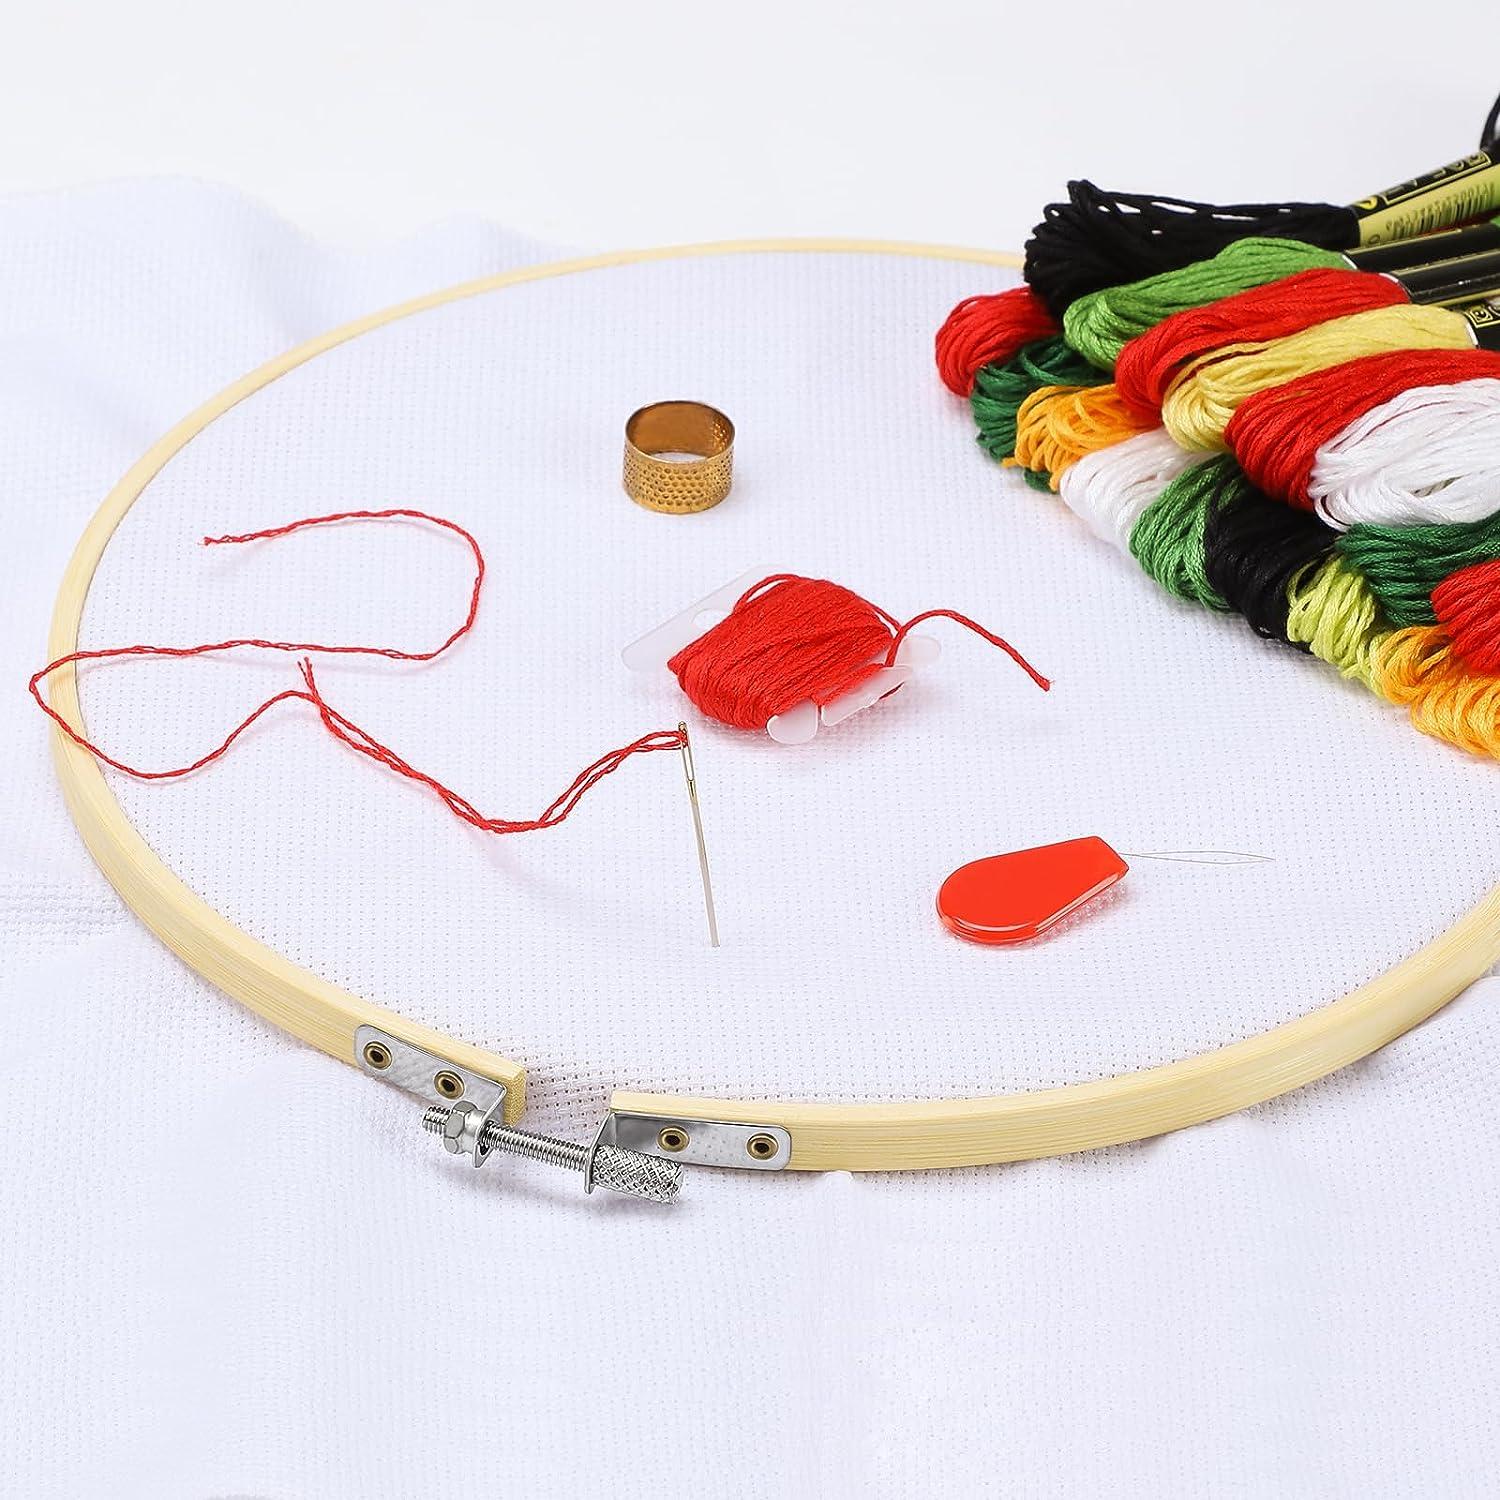 10-40cm DIY Embroidery Hoop Tool Art Craft Cross Stitch Chinese Traditional  Circle Round Bamboo Frame